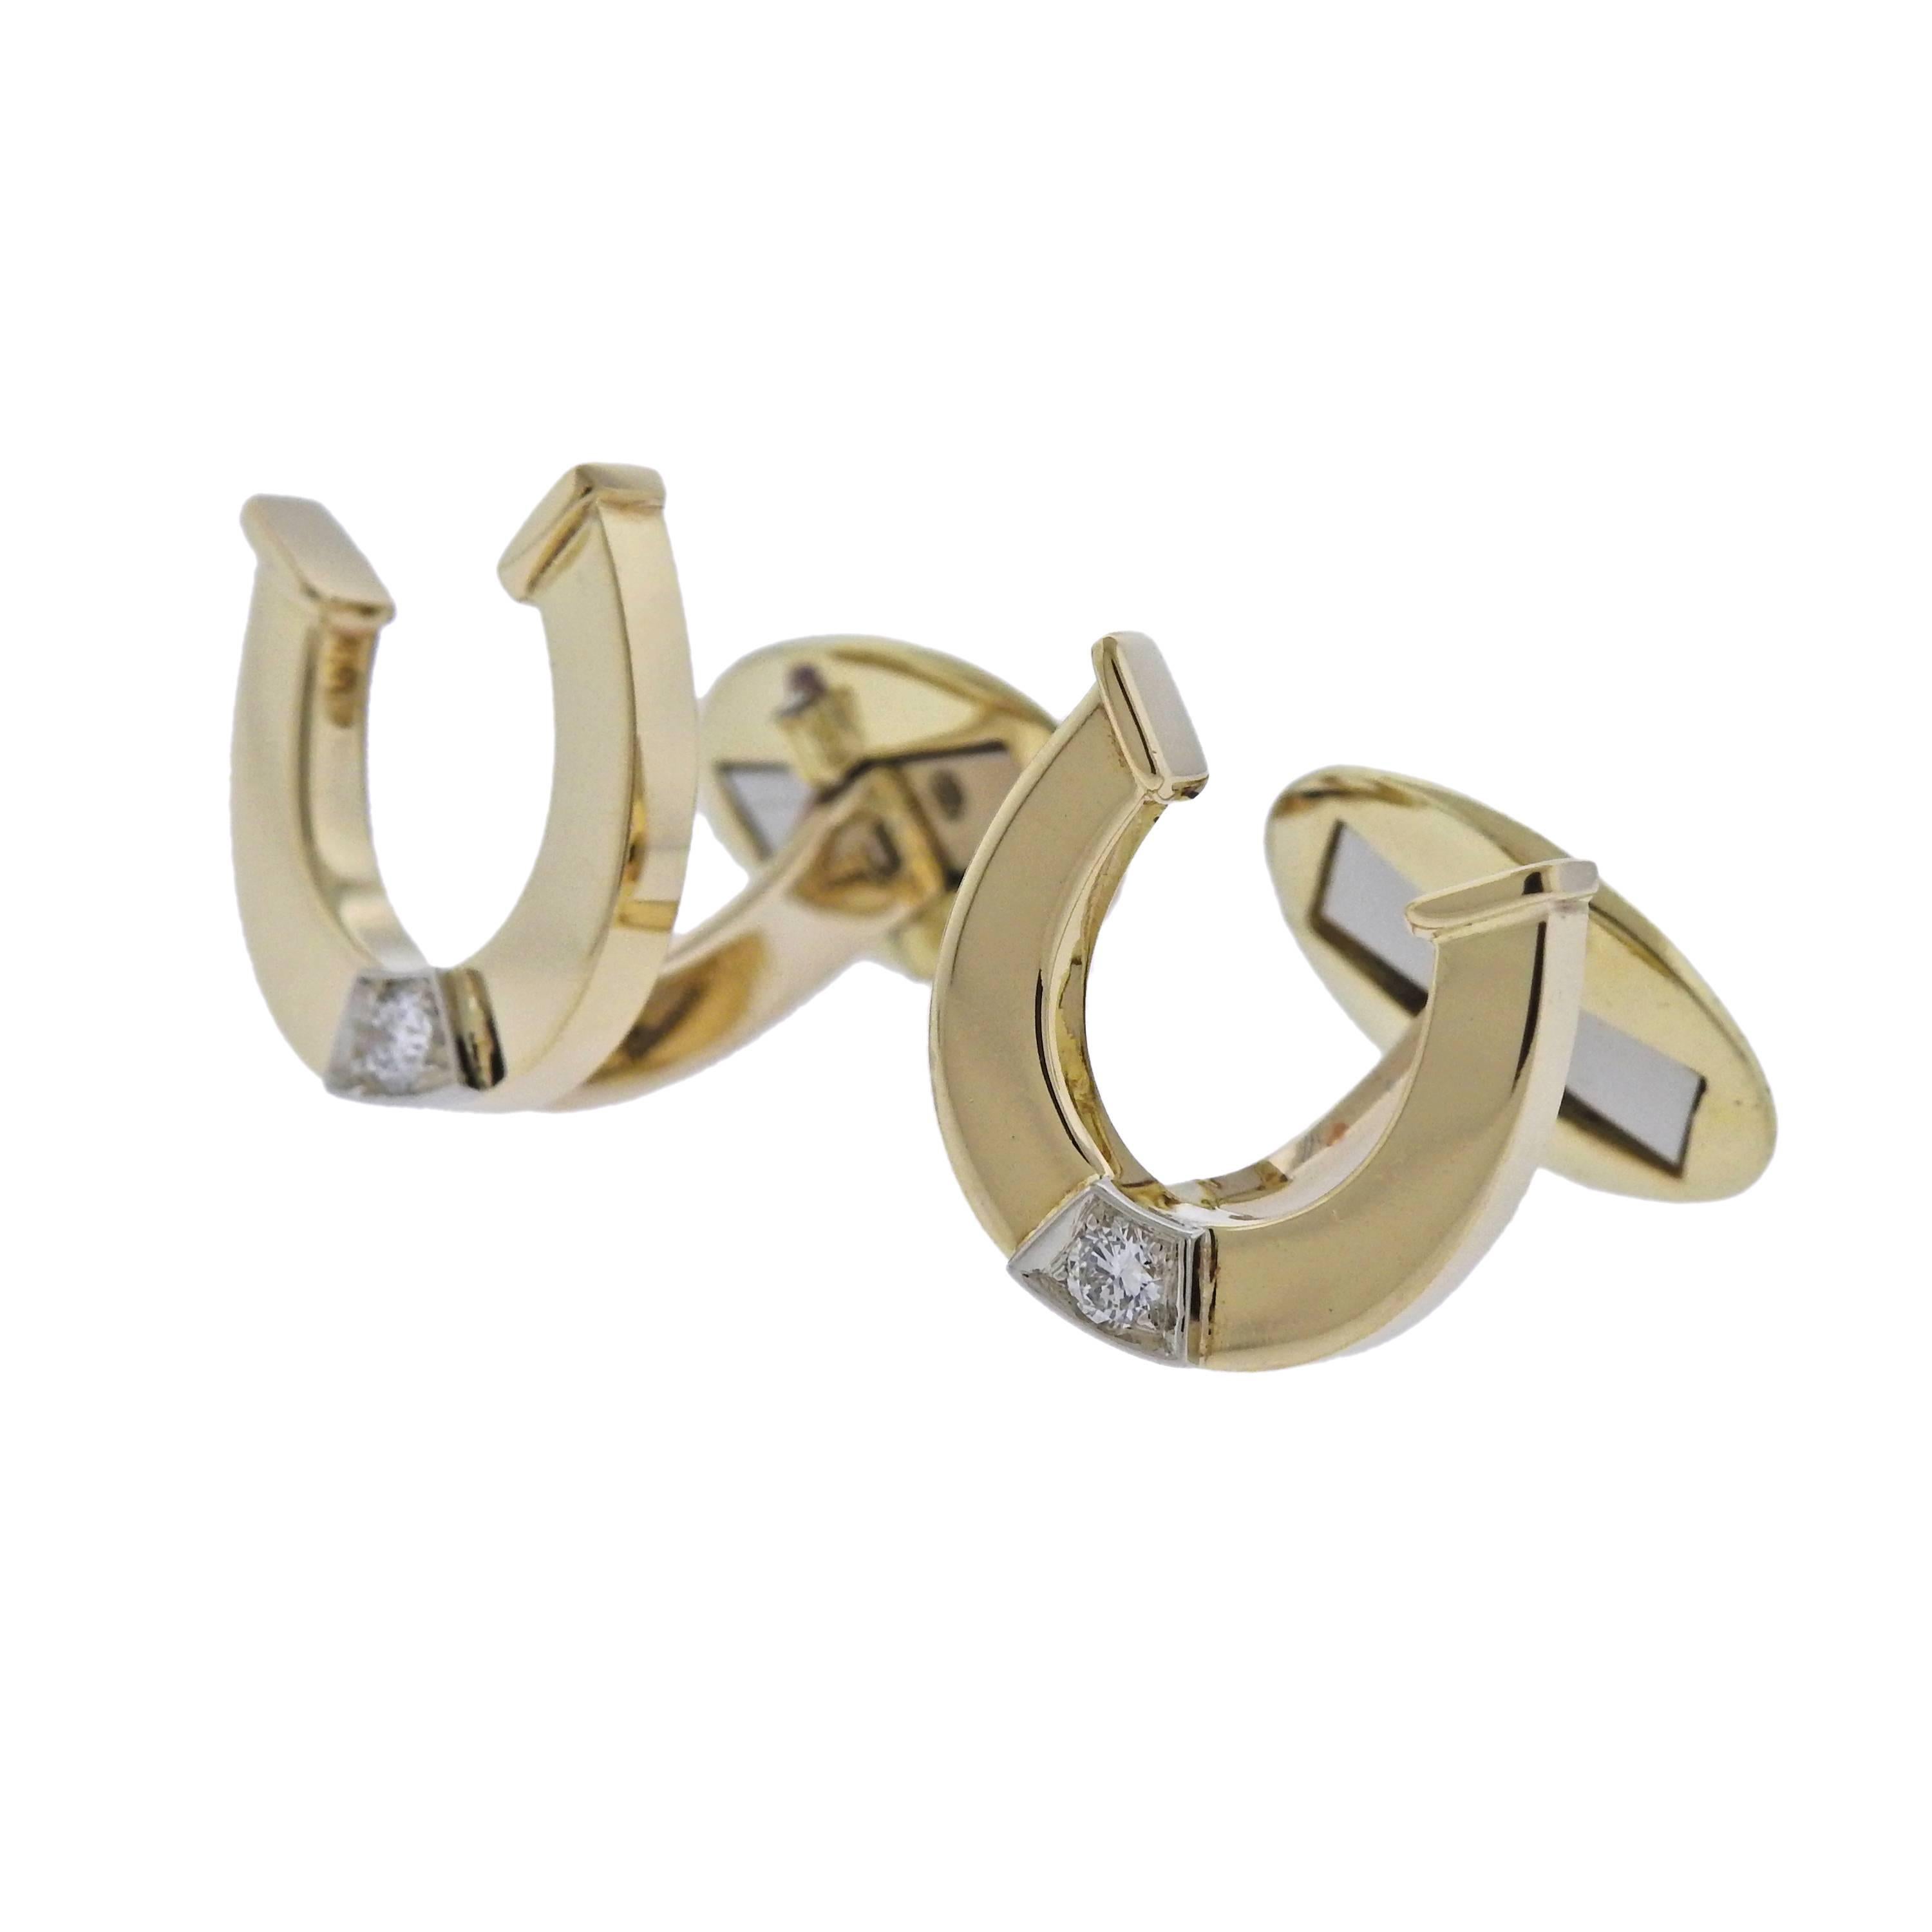  Pair of 18k yellow gold horseshoe cufflinks, each adorned with an approx. 0.05ct diamond in the center, crafted by Bulgari. Cufflink top is 15mm x 16mm, weight - 11 grams. Marked: Bvlgari, 750, C1568.